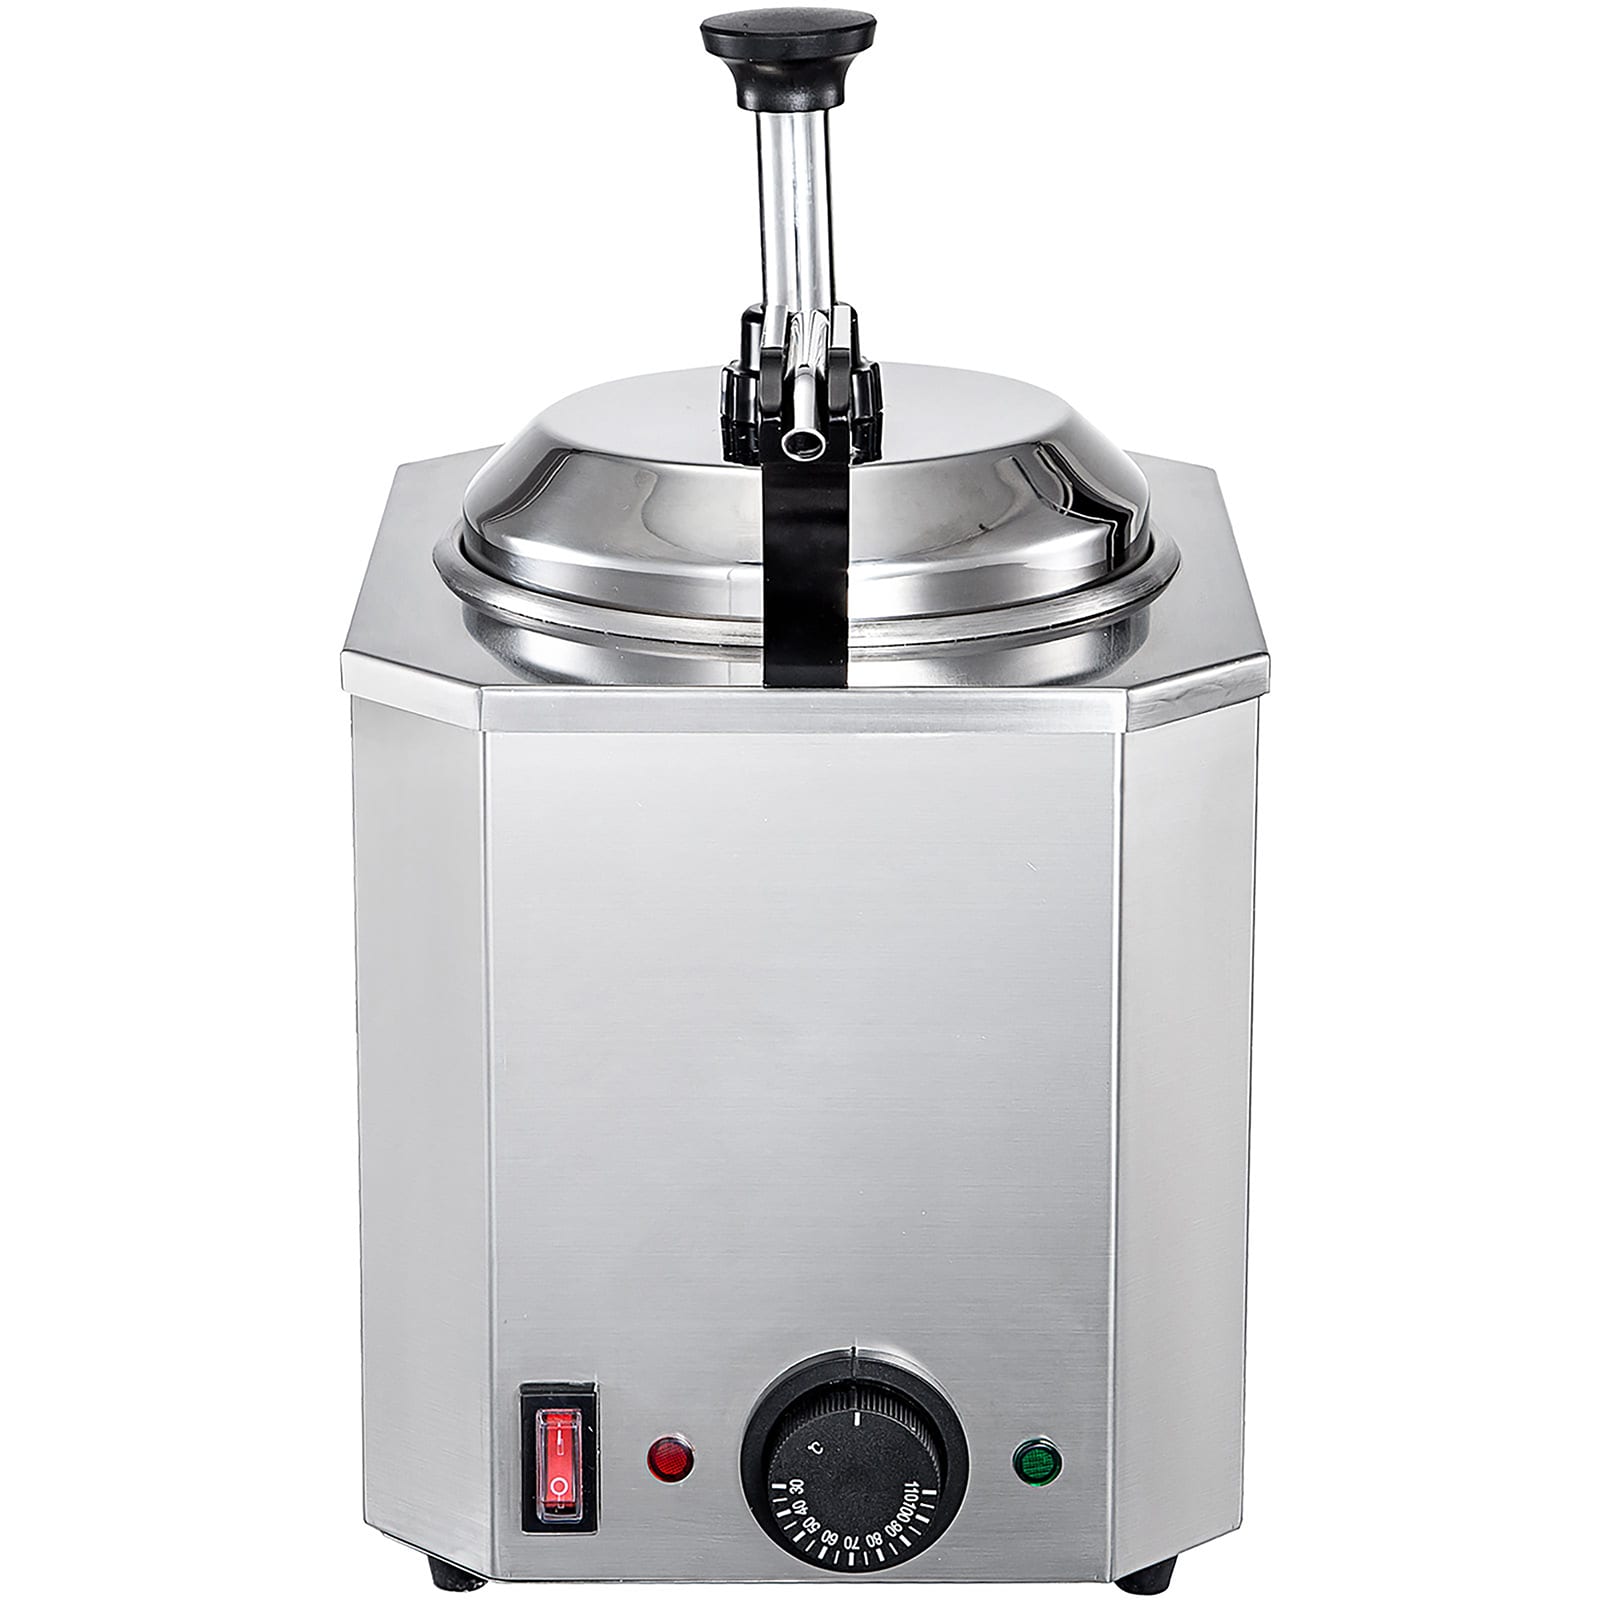 VEVOR Electric Cheese Dispenser with Pump, 2.3 qt Commercial Hot Fudge Warmer, Stainless Steel Pump Dispenser, 86-230 Temp Adjustable Nacho Cheese